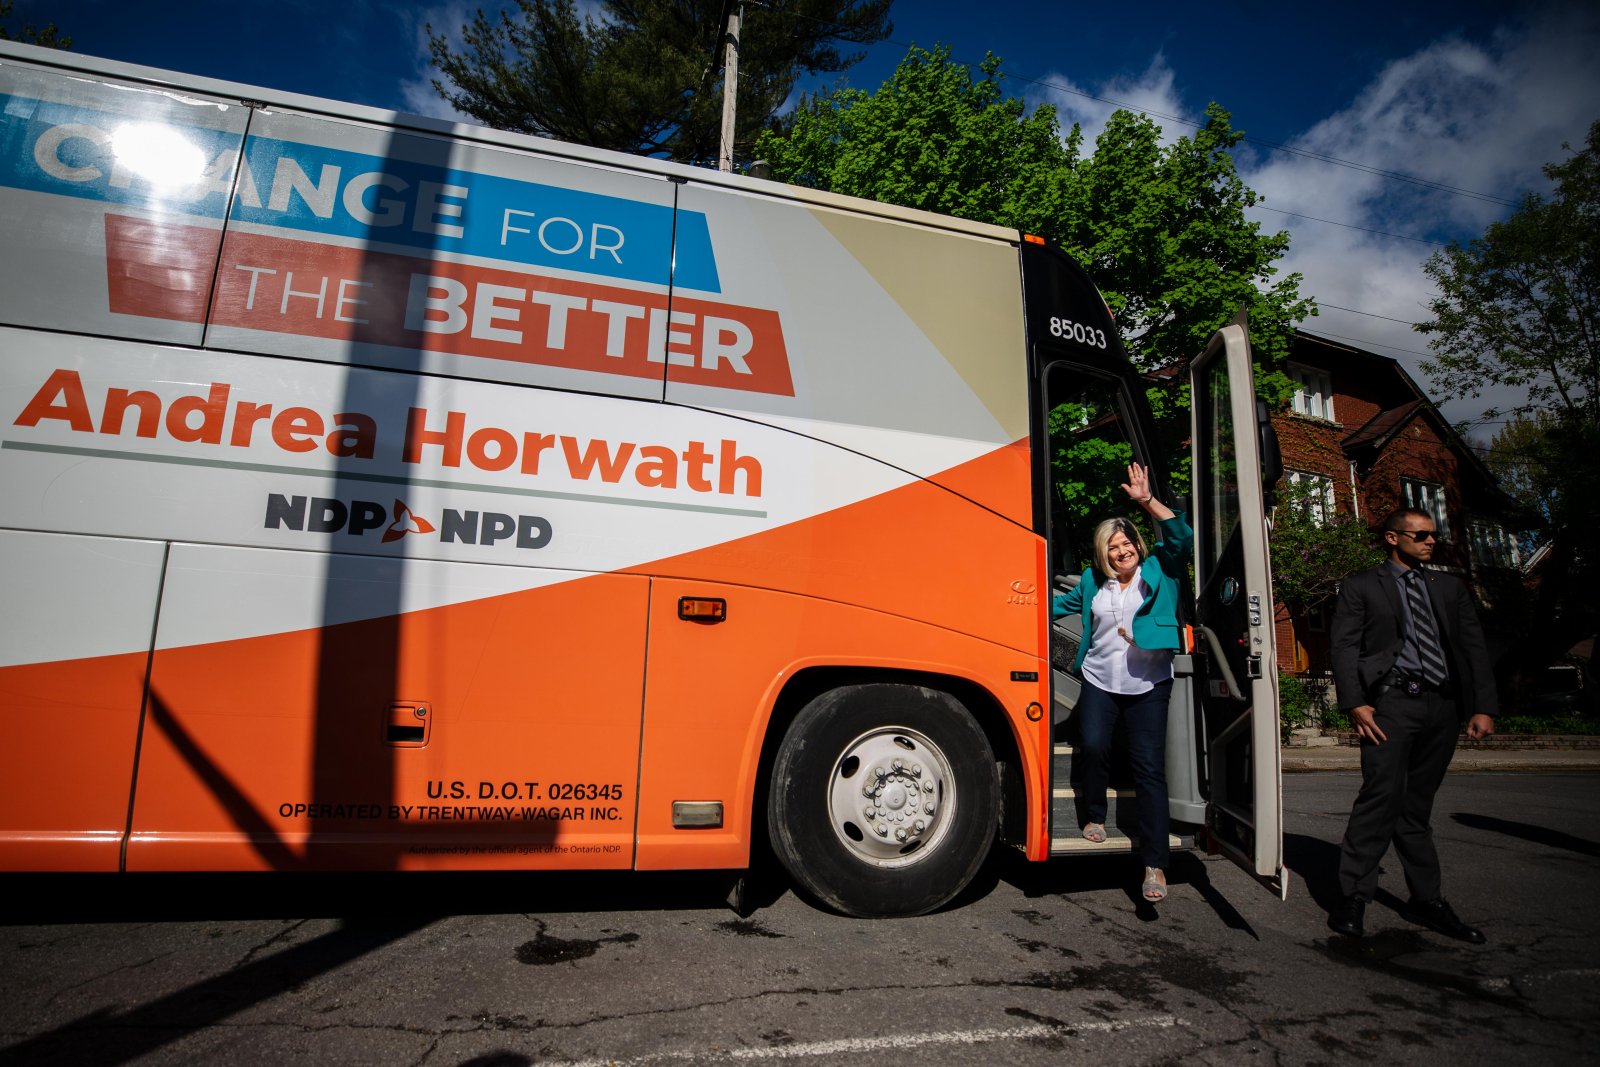 Ontario NDP Leader Andrea Horwath arrives at a campaign event in Ottawa on May 20, 2018. Photo by Alex Tétreault